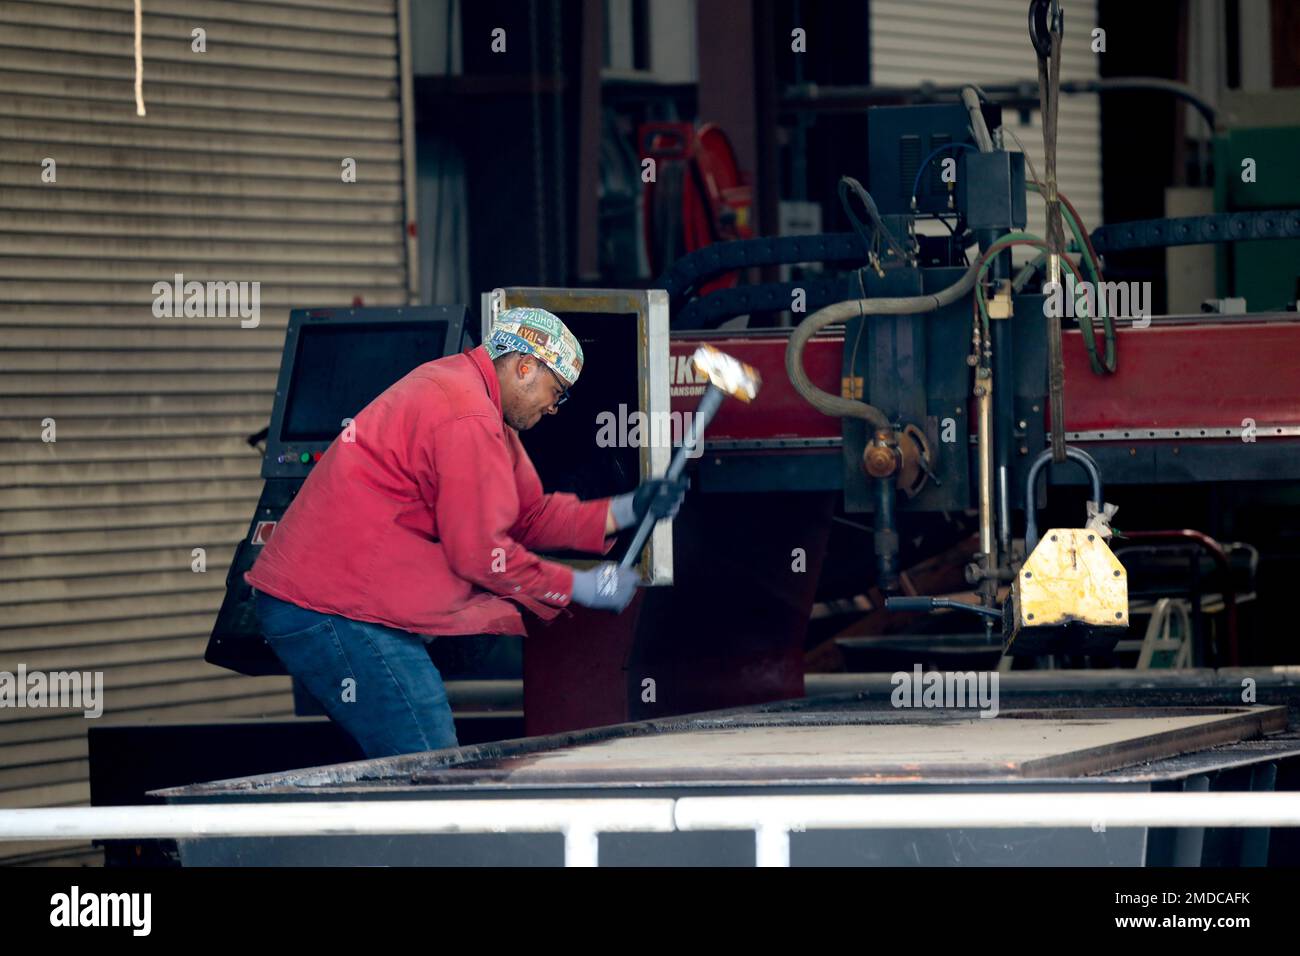 Michael Dunning Jr., a welder at the Army Corps of Engineers runs a PlateProX HD Large CNC Plasma/Oxy-fuel capable metal cutting machine, to cut out a 2 inch flange (donut) for the machinist to work on in the process of completing a off site project. Stock Photo